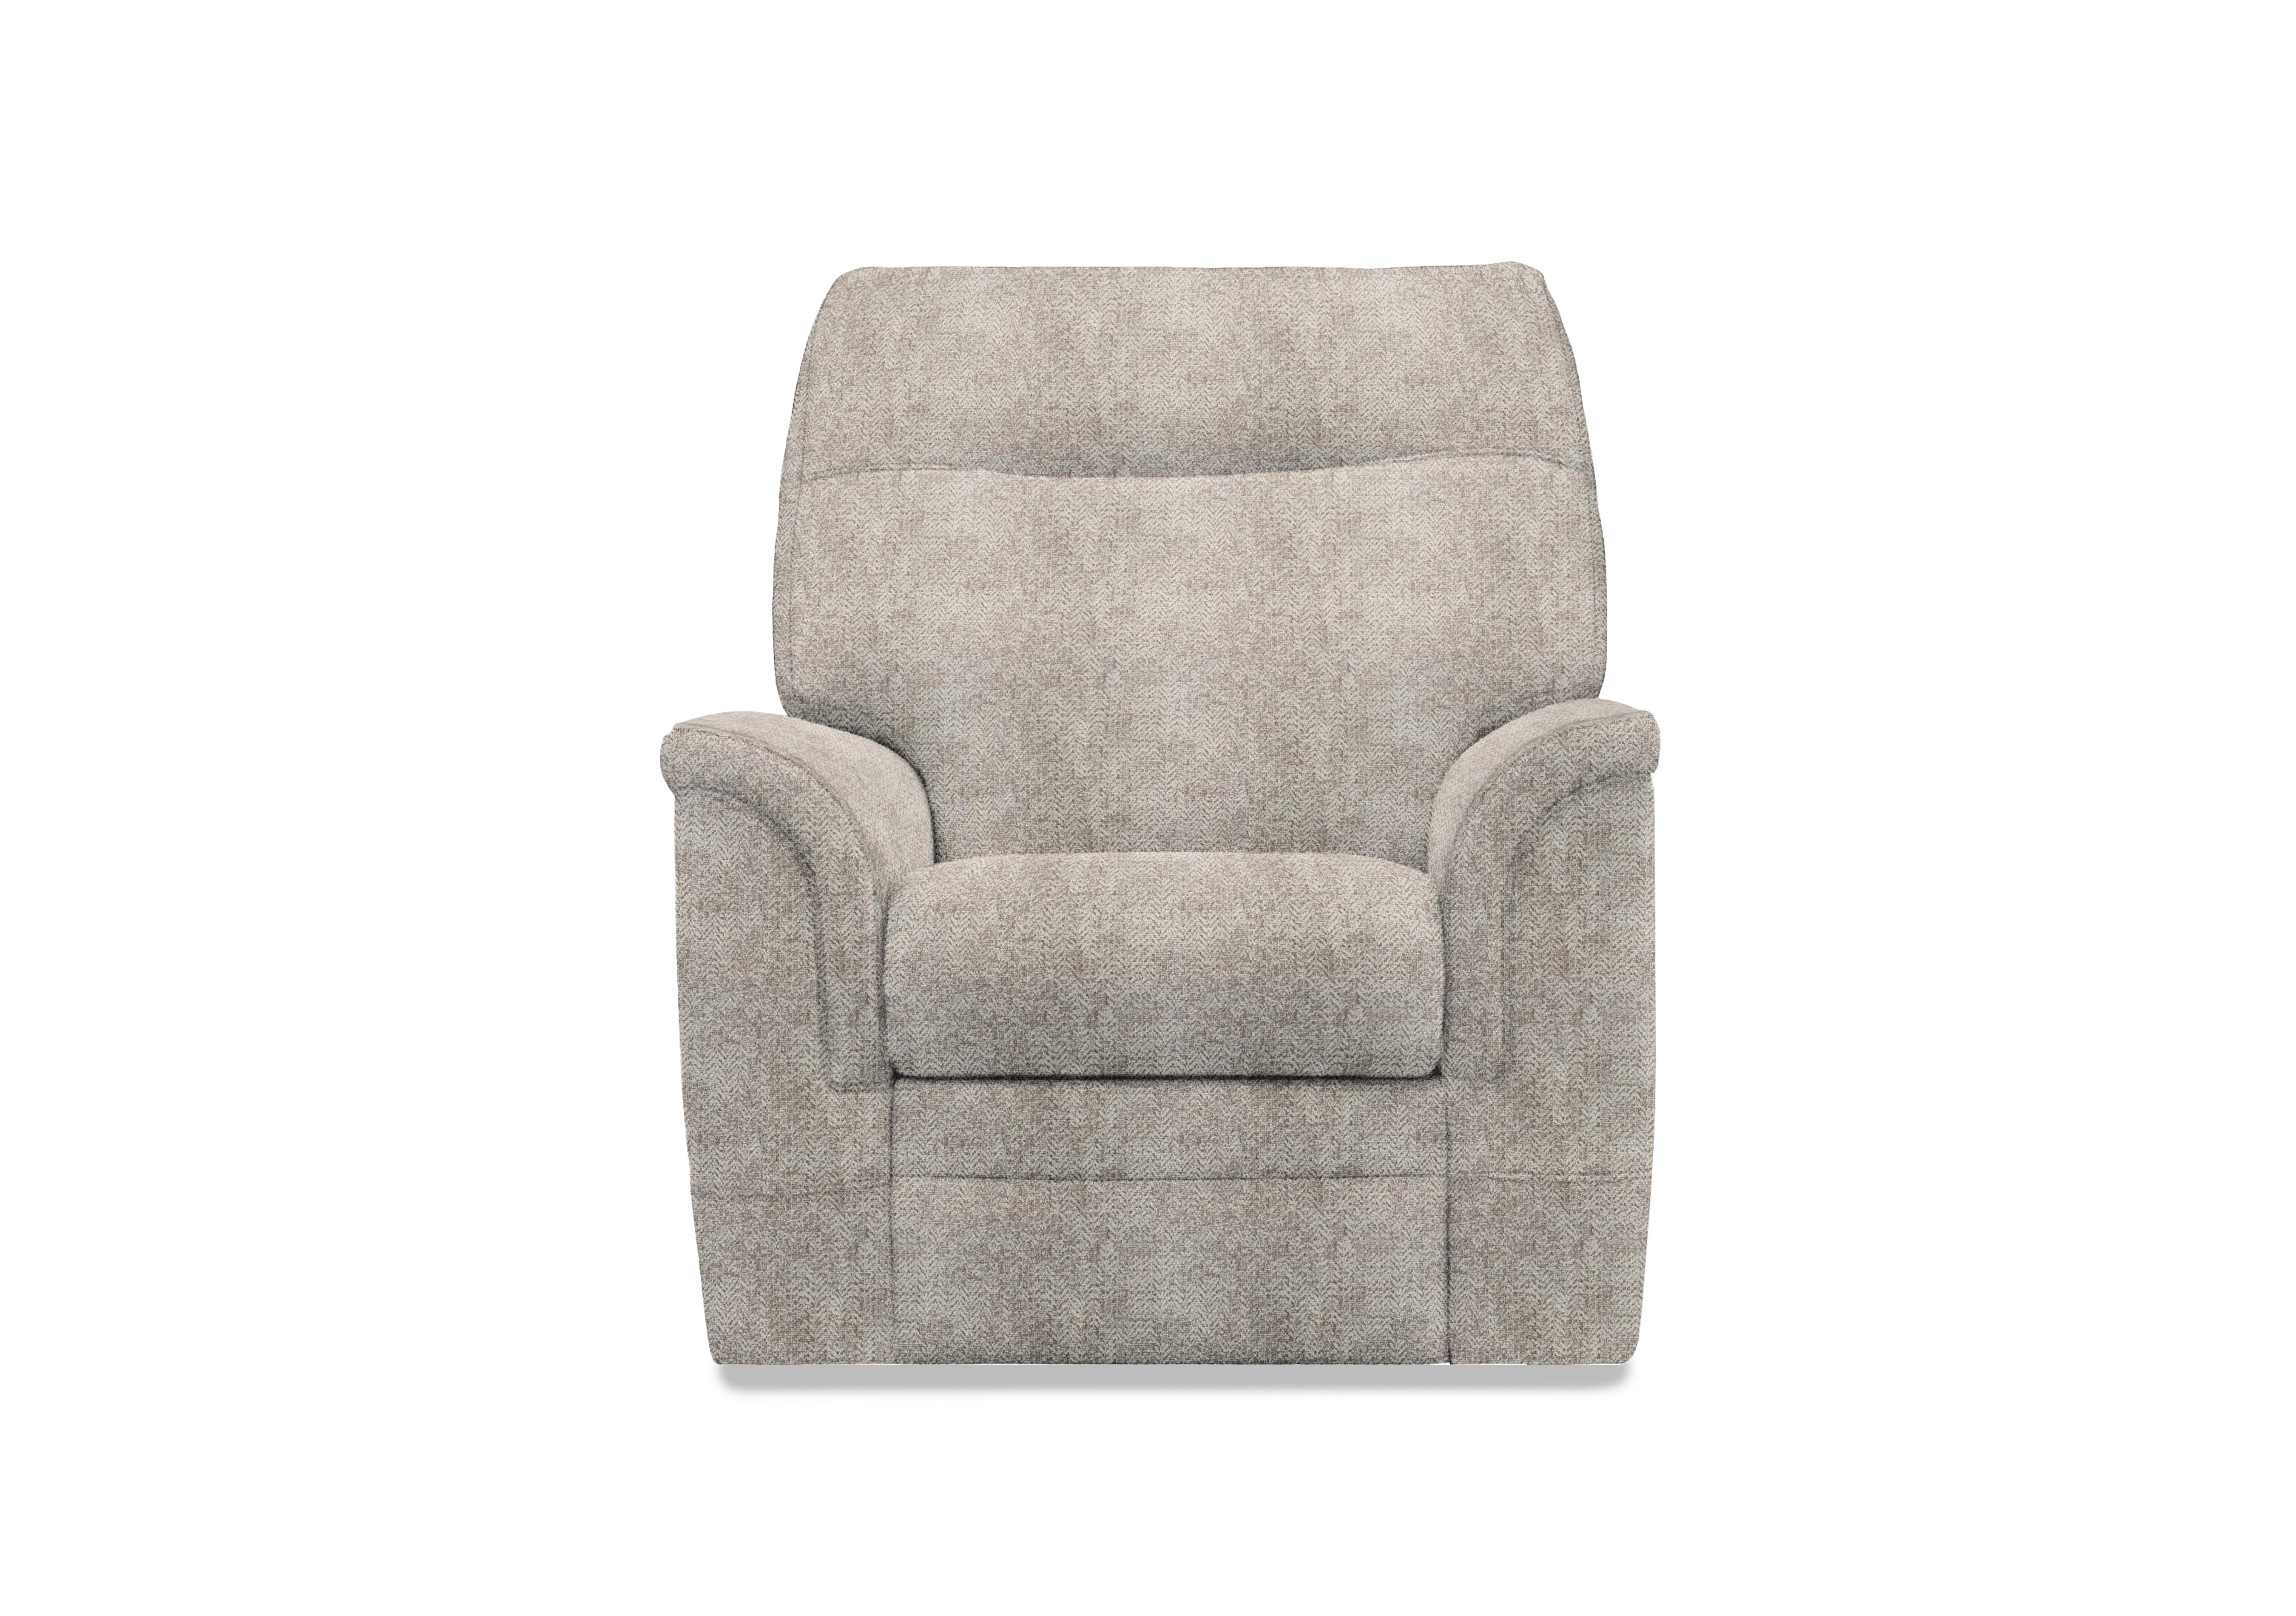 Hudson 23 Fabric Power Recliner Chair with Power Headrest and Power Lumbar in Ida Stone 006035-0055 on Furniture Village